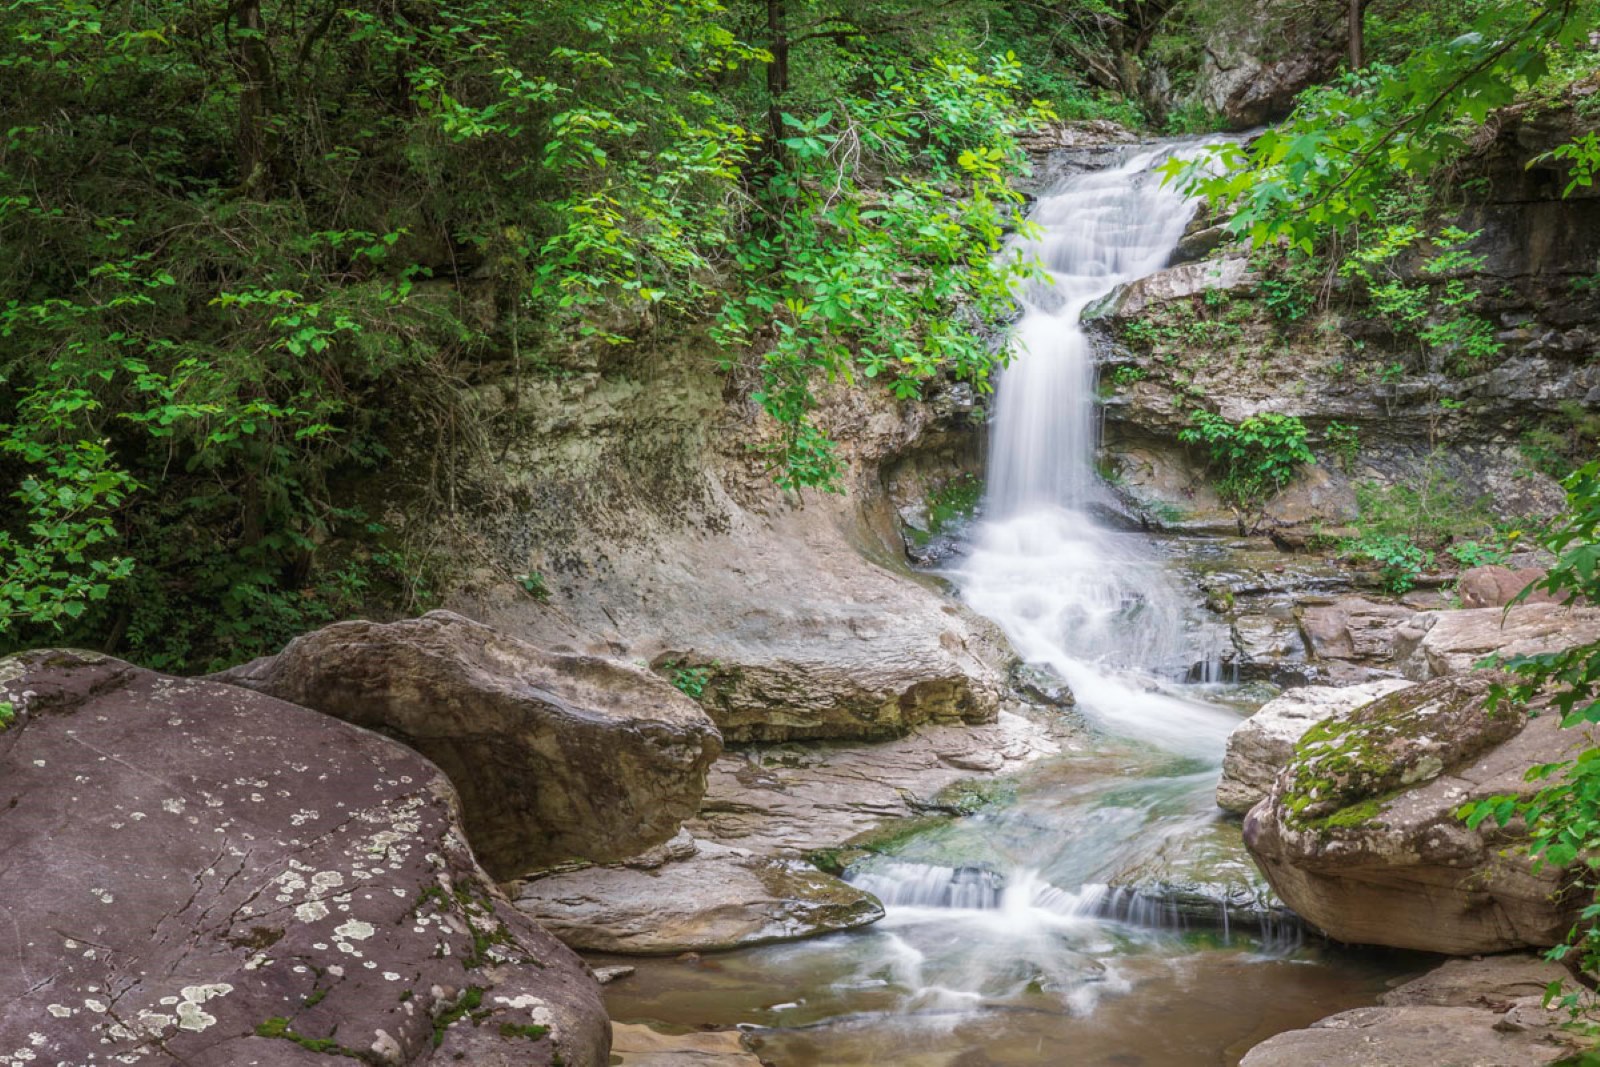 Broadwater Hollow Falls is a hidden gem in a boulder-strewn gorge near Paige Falls.  (Photo by Sony Hocklander)